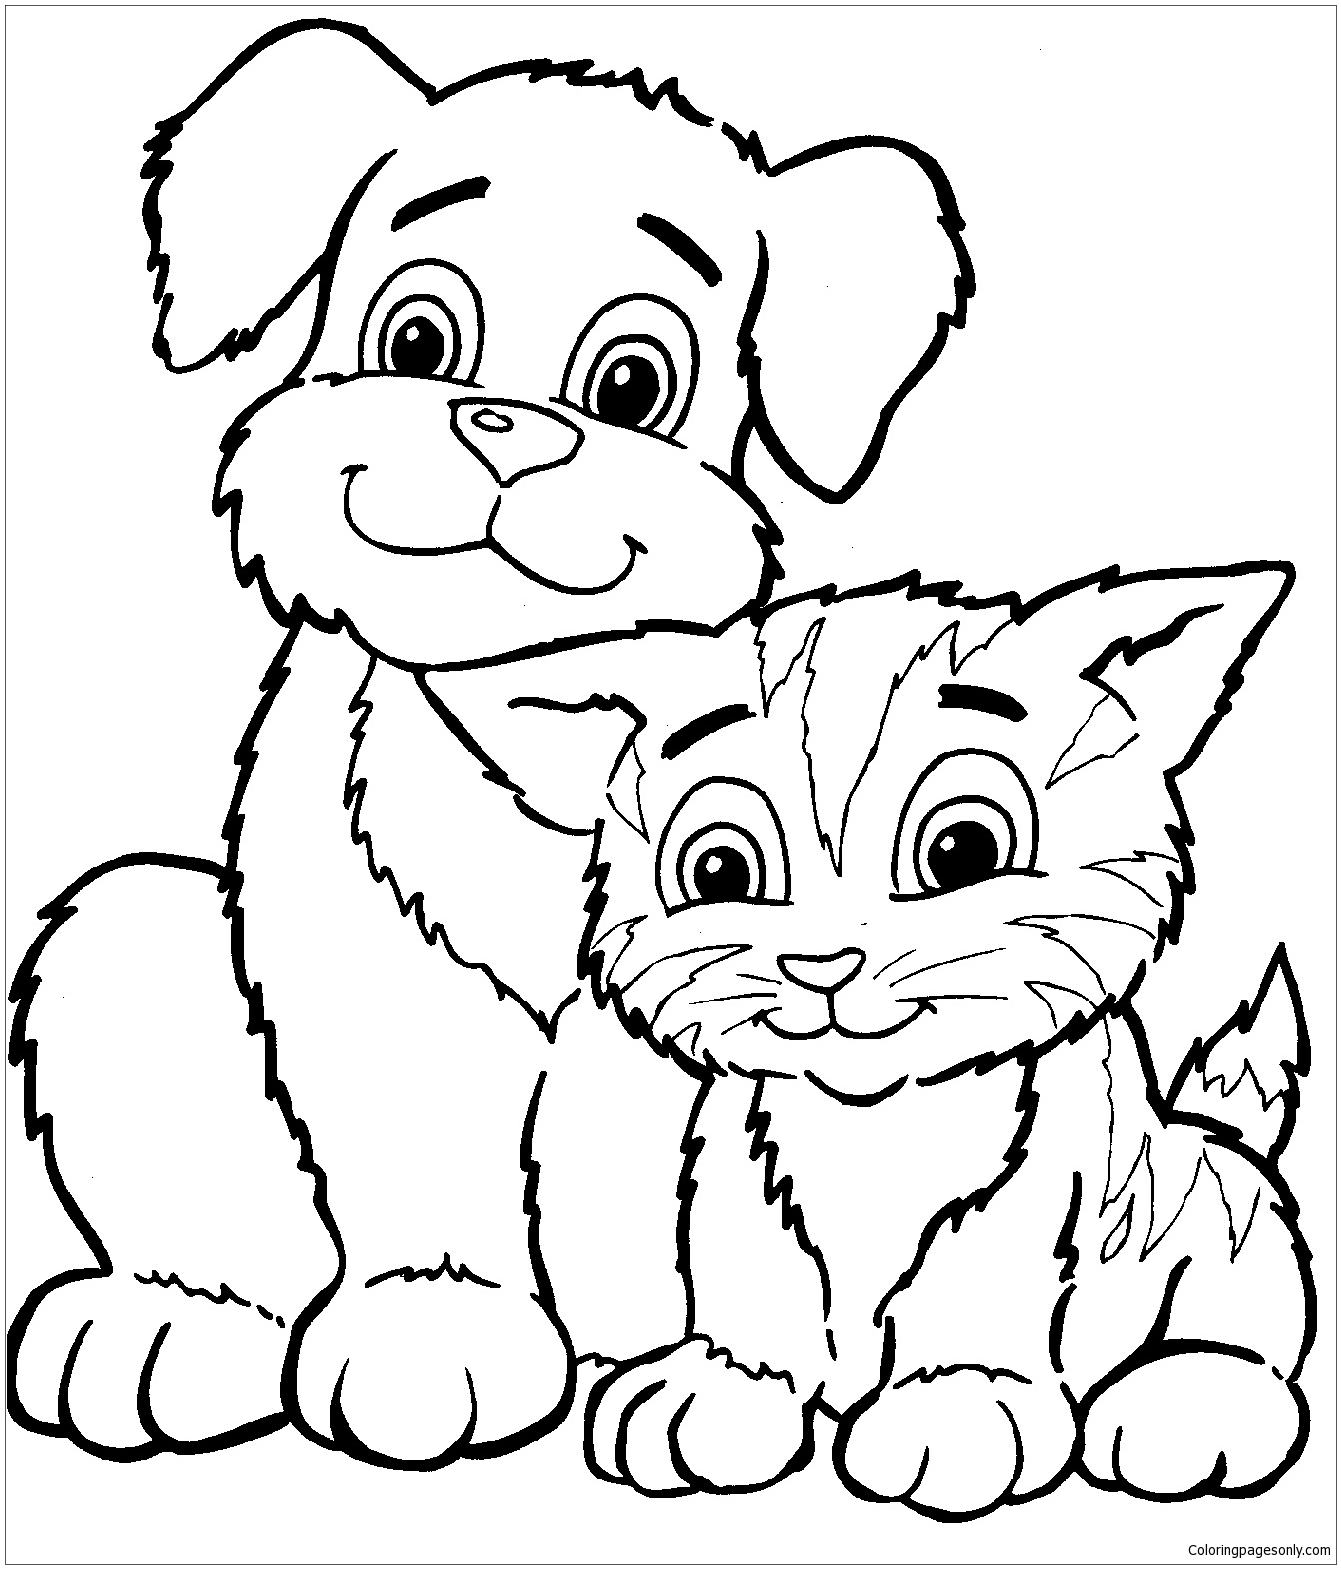 Dogs And Cats Coloring Page